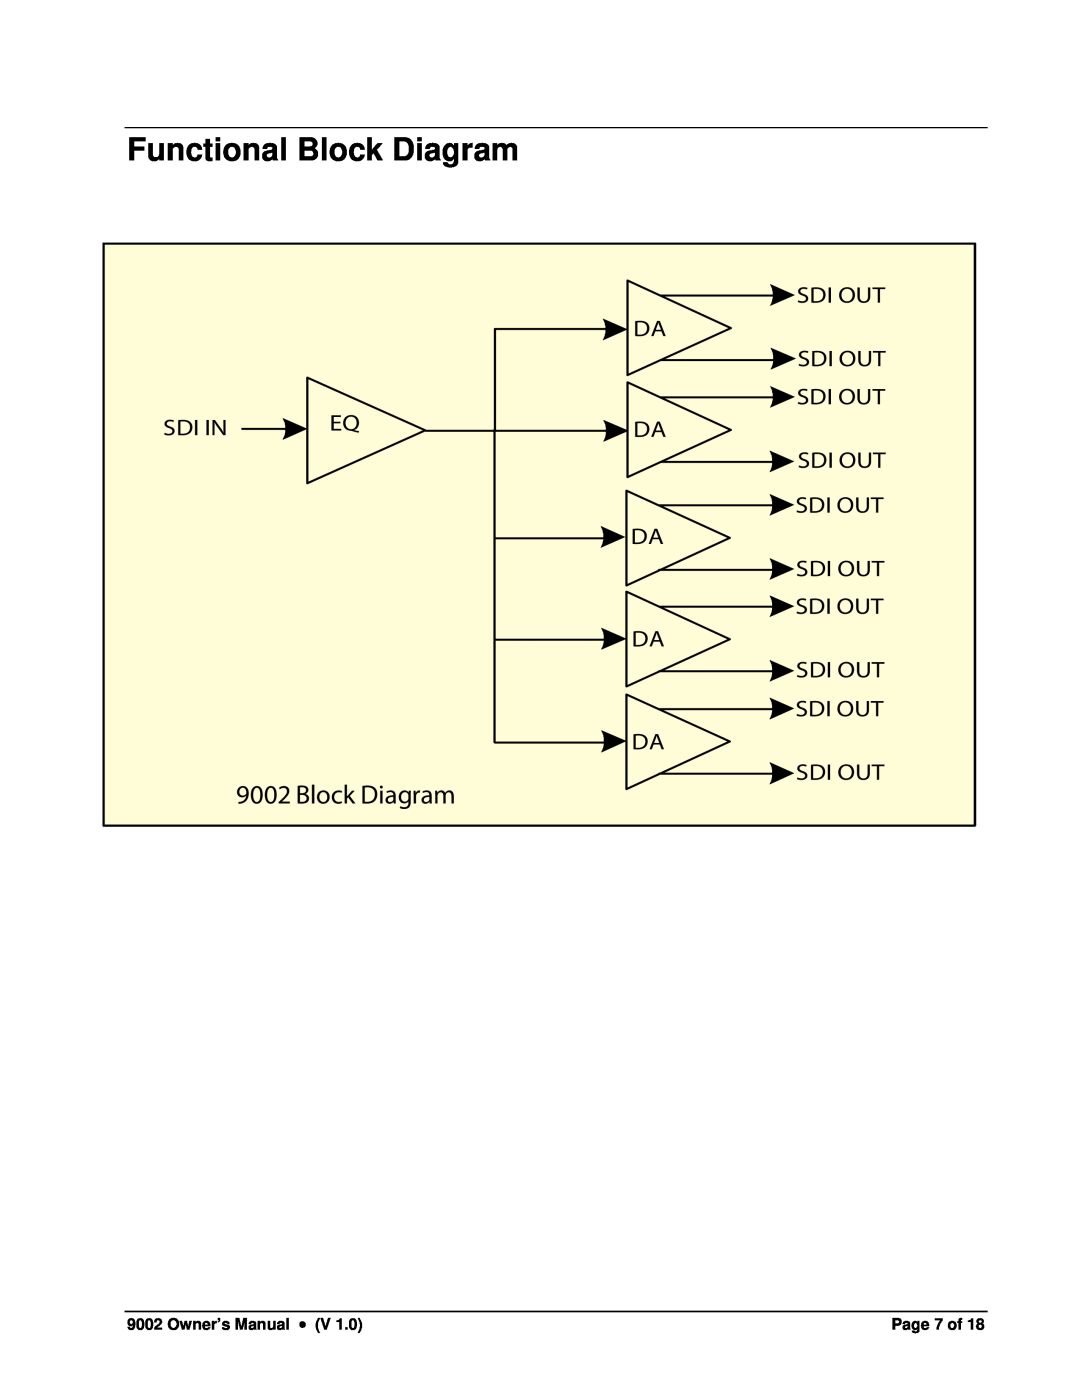 Cobalt Networks 9002 owner manual Functional Block Diagram, Sdi Out Da Sdi Out Sdi Out, Sdi In, Page 7 of 